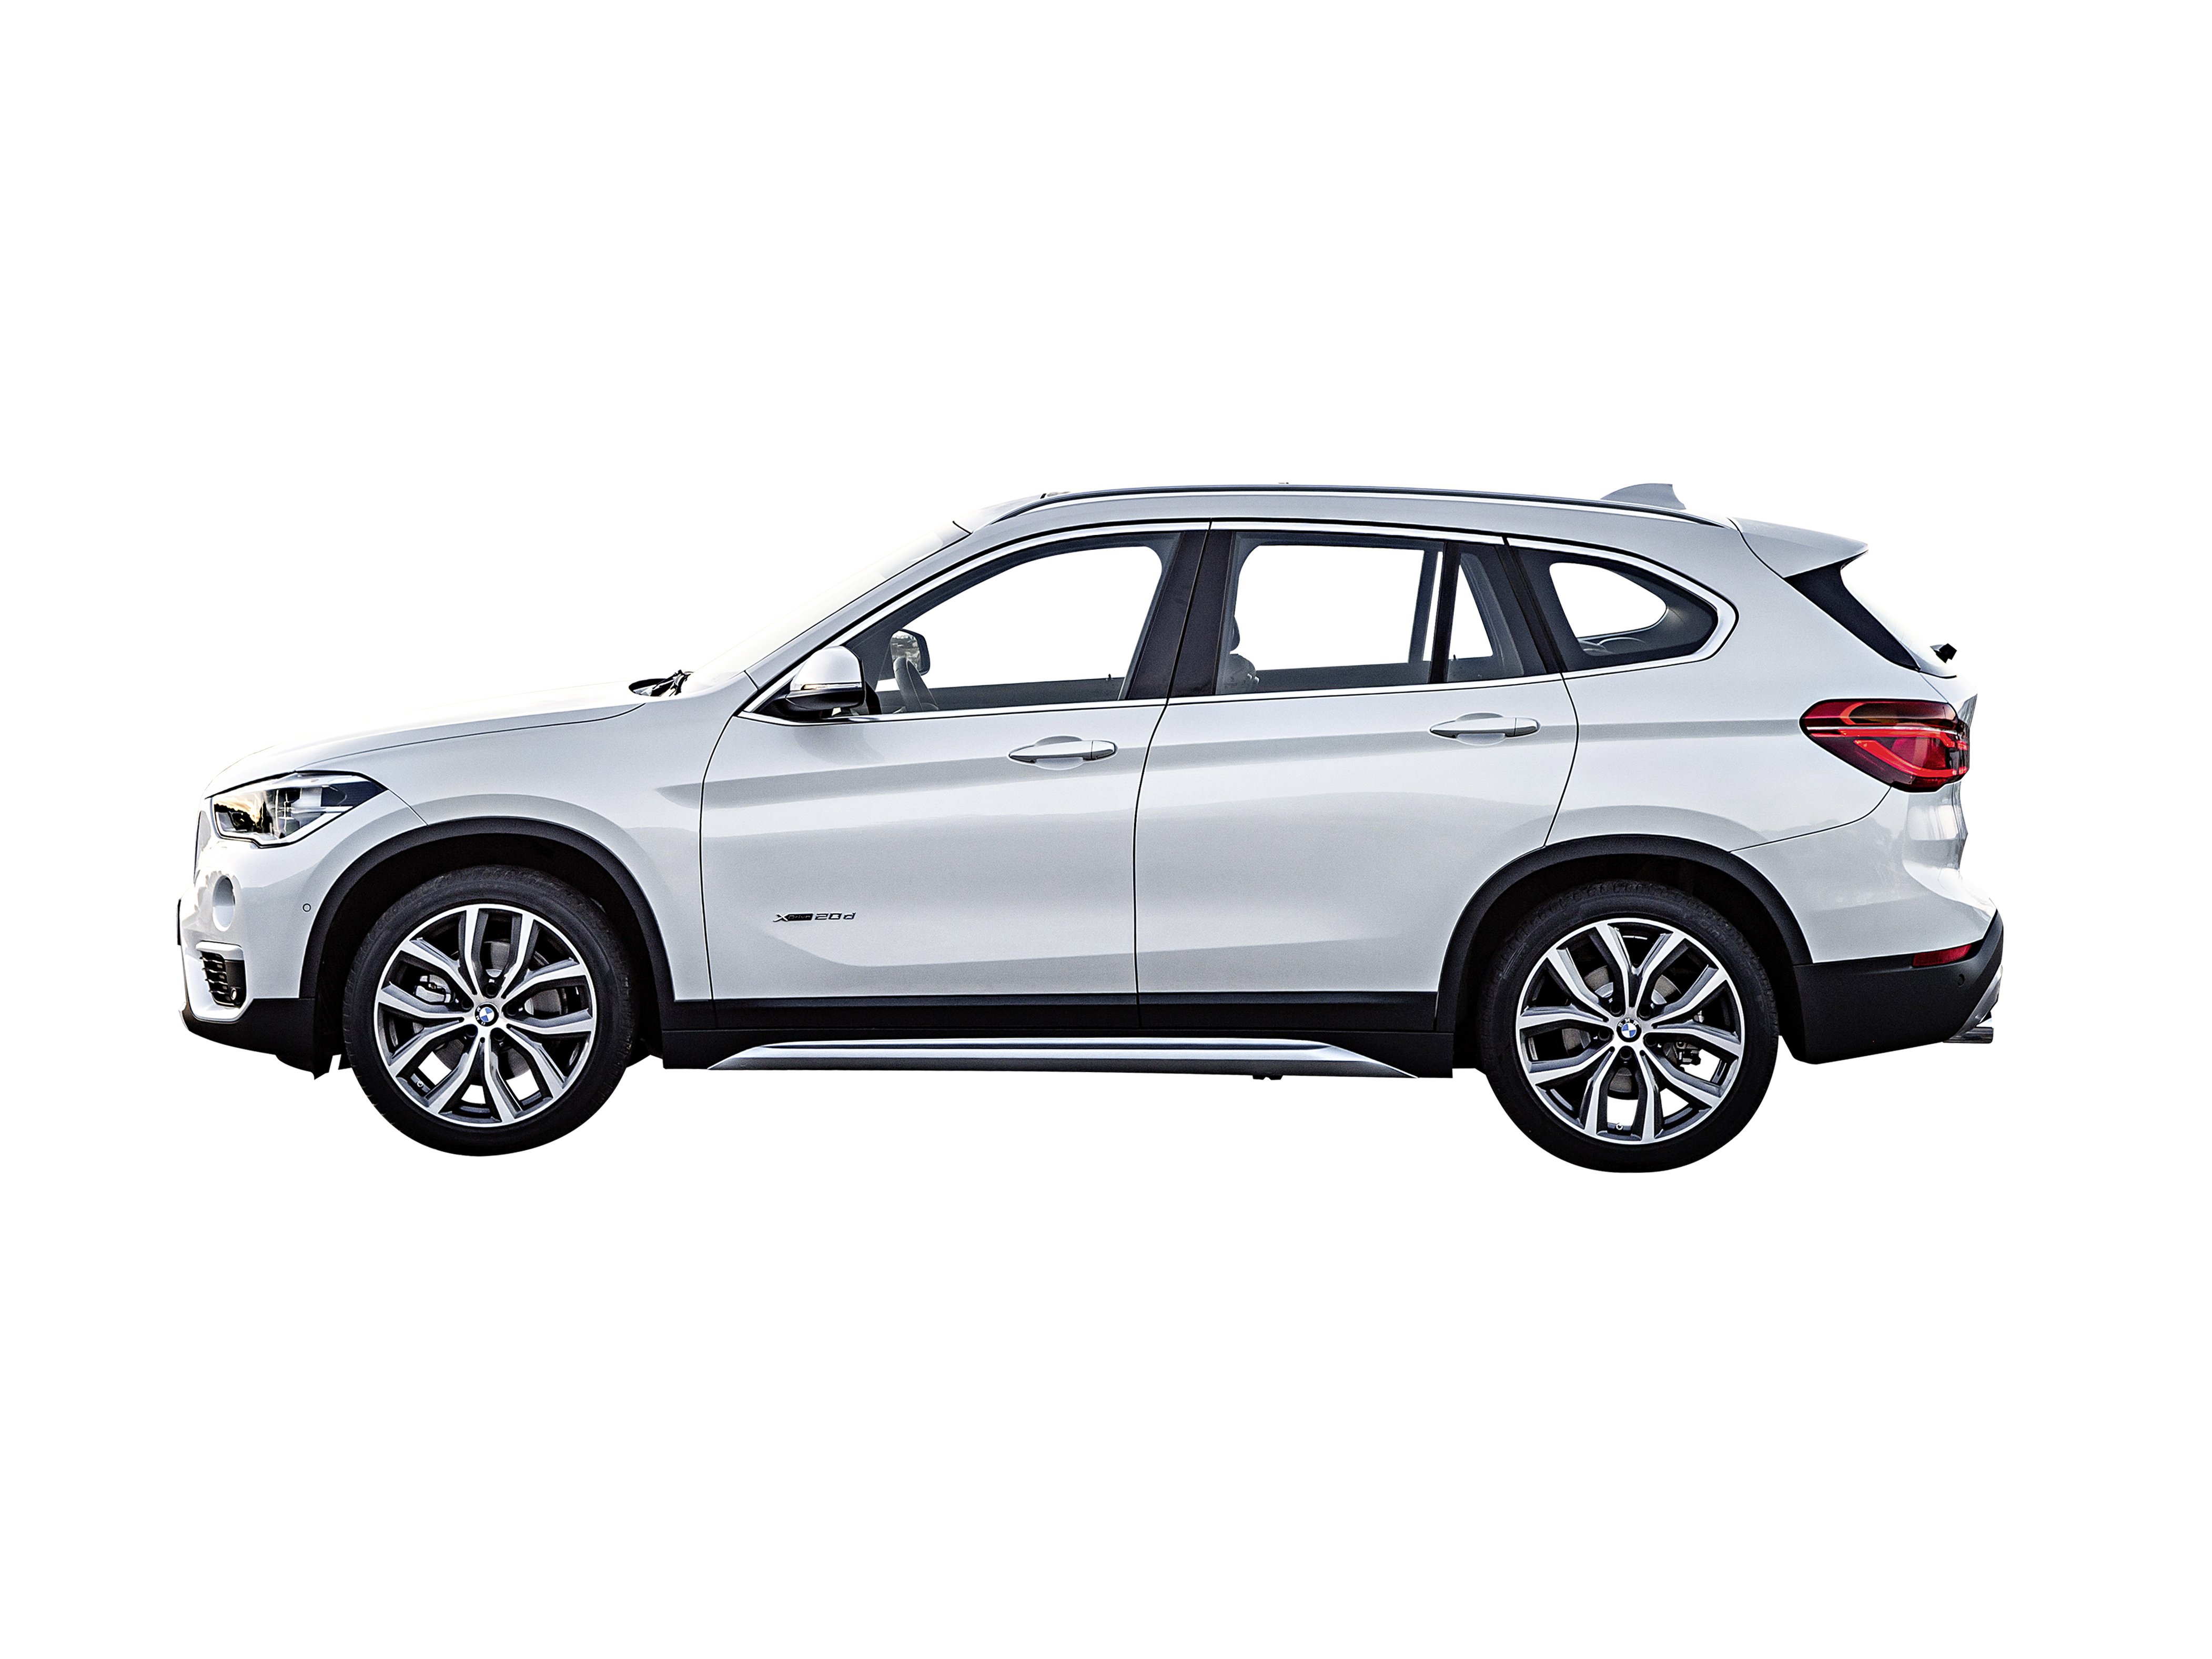 Review: BMW X1 xDrive28i - Today's Parent - Today's Parent